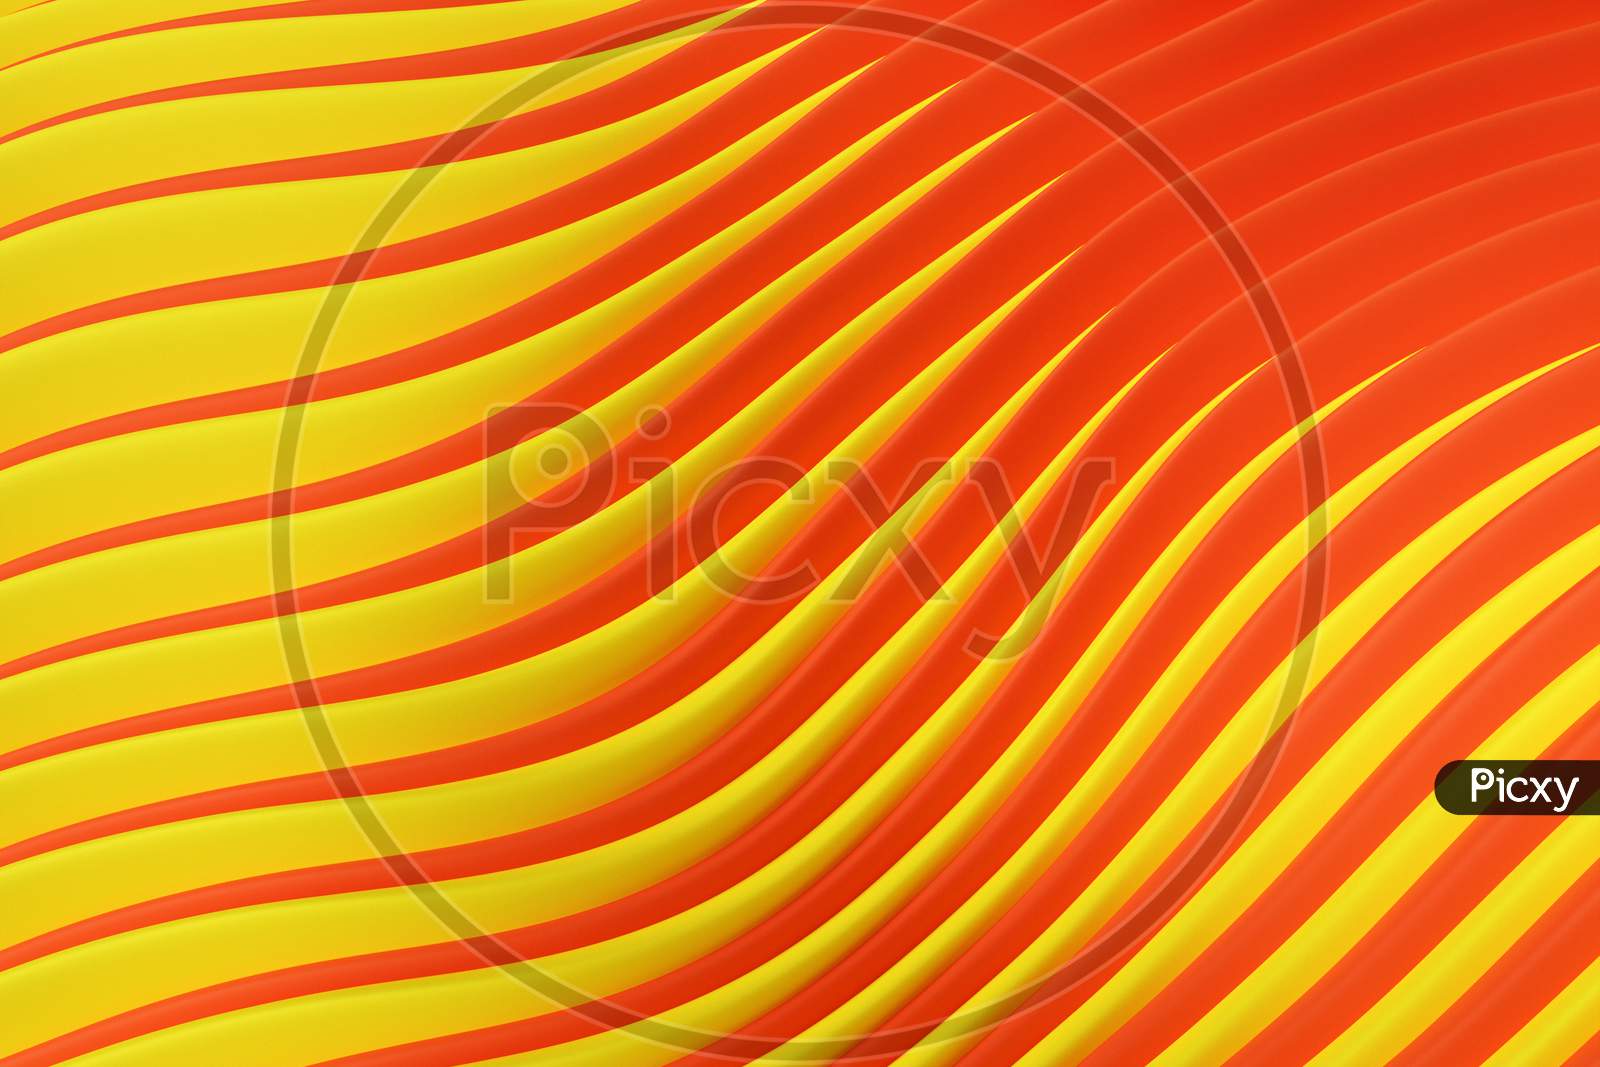 3D Illustration Of Rows  Yellow, Orange  Portal, Cave .Shape Pattern. Technology Geometry  Background.